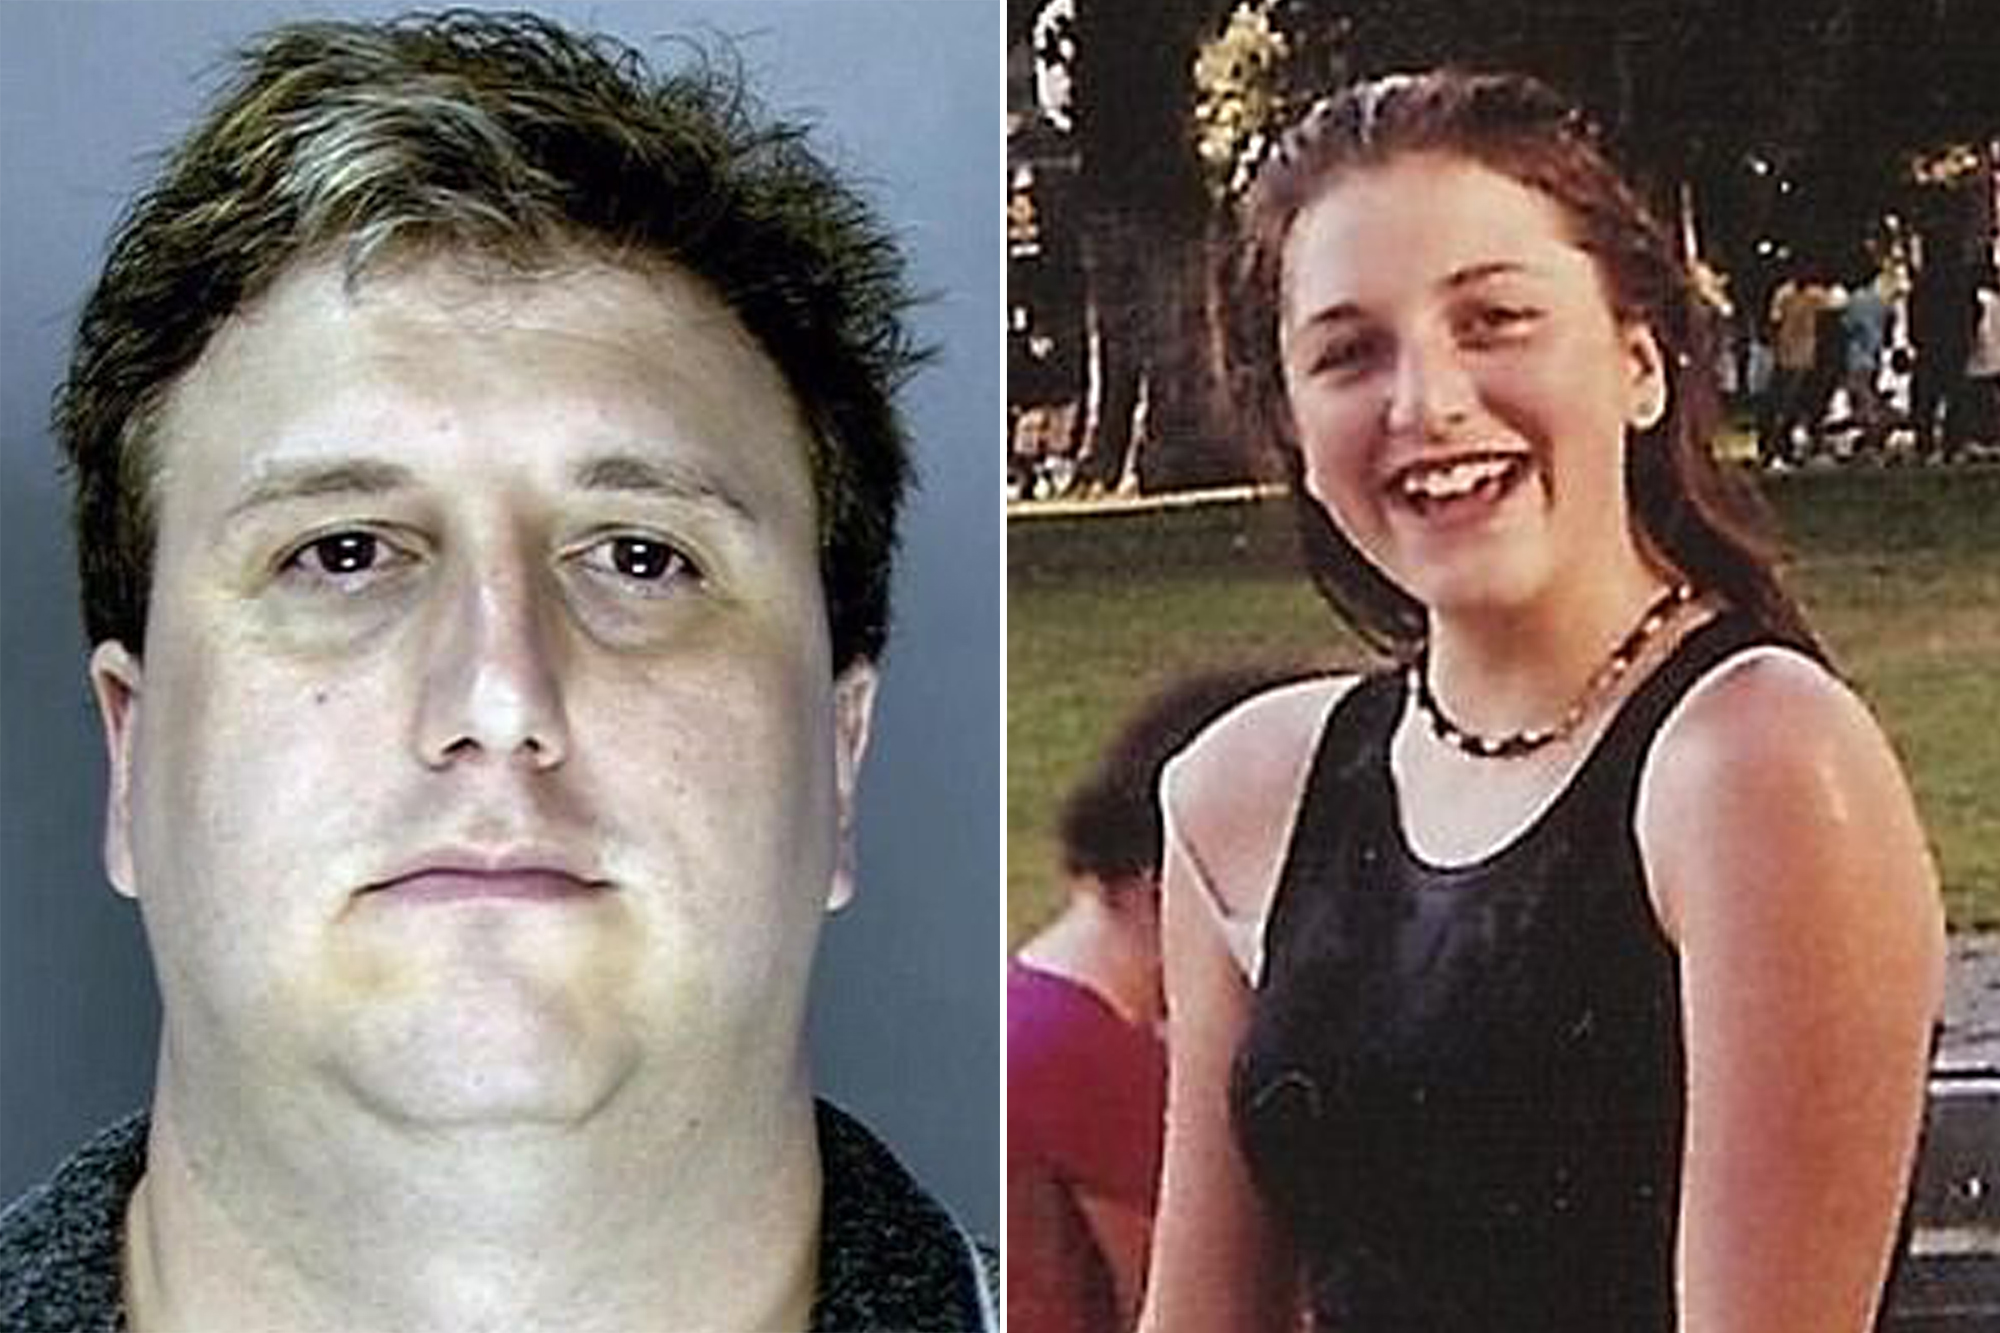 donna haskins recommends real dad rapes daughter pic